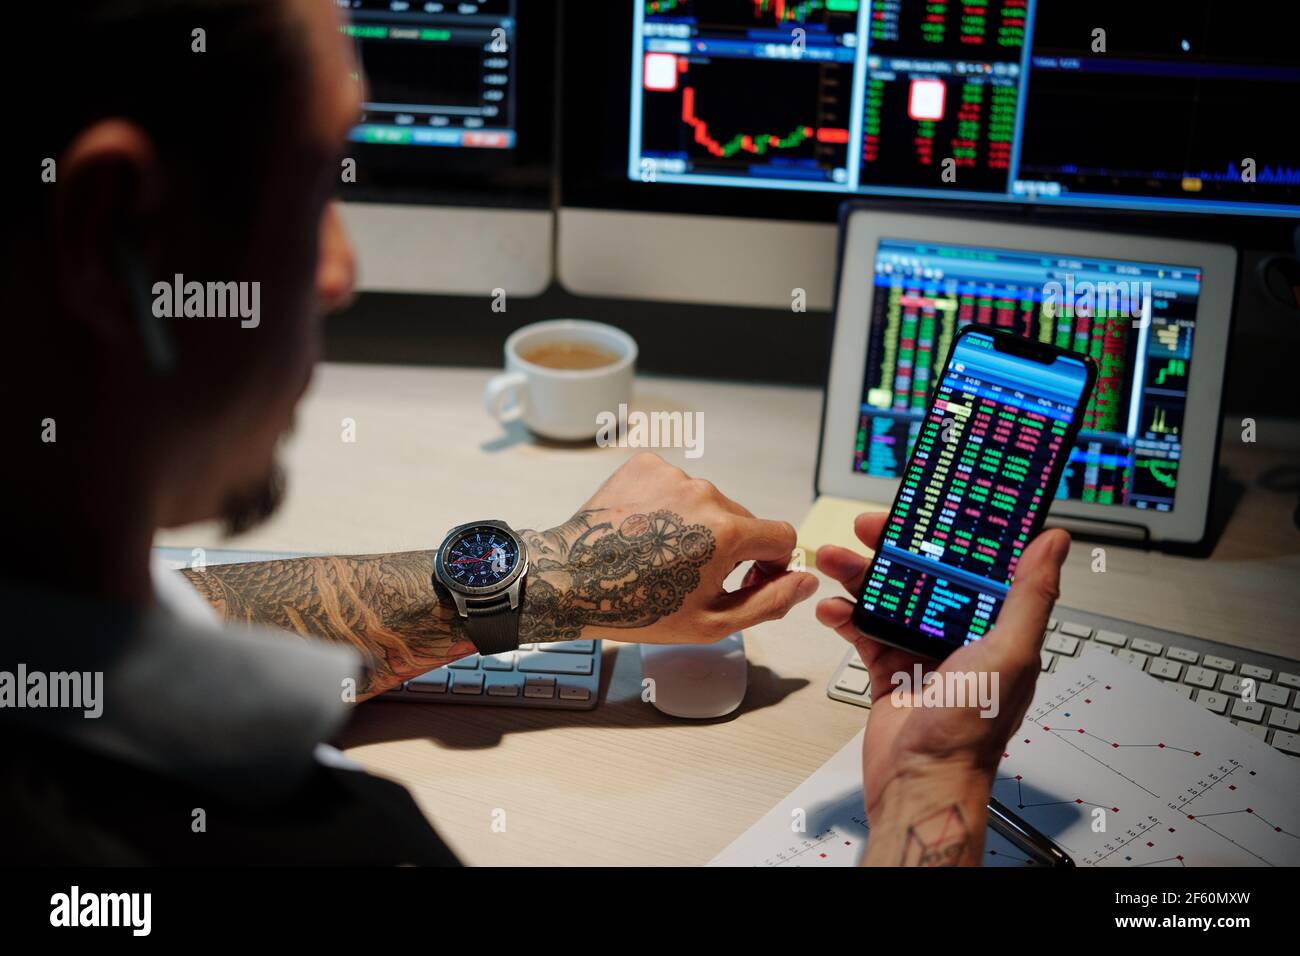 Trader working late at night and checking stock markets data via application on smartphone Stock Photo